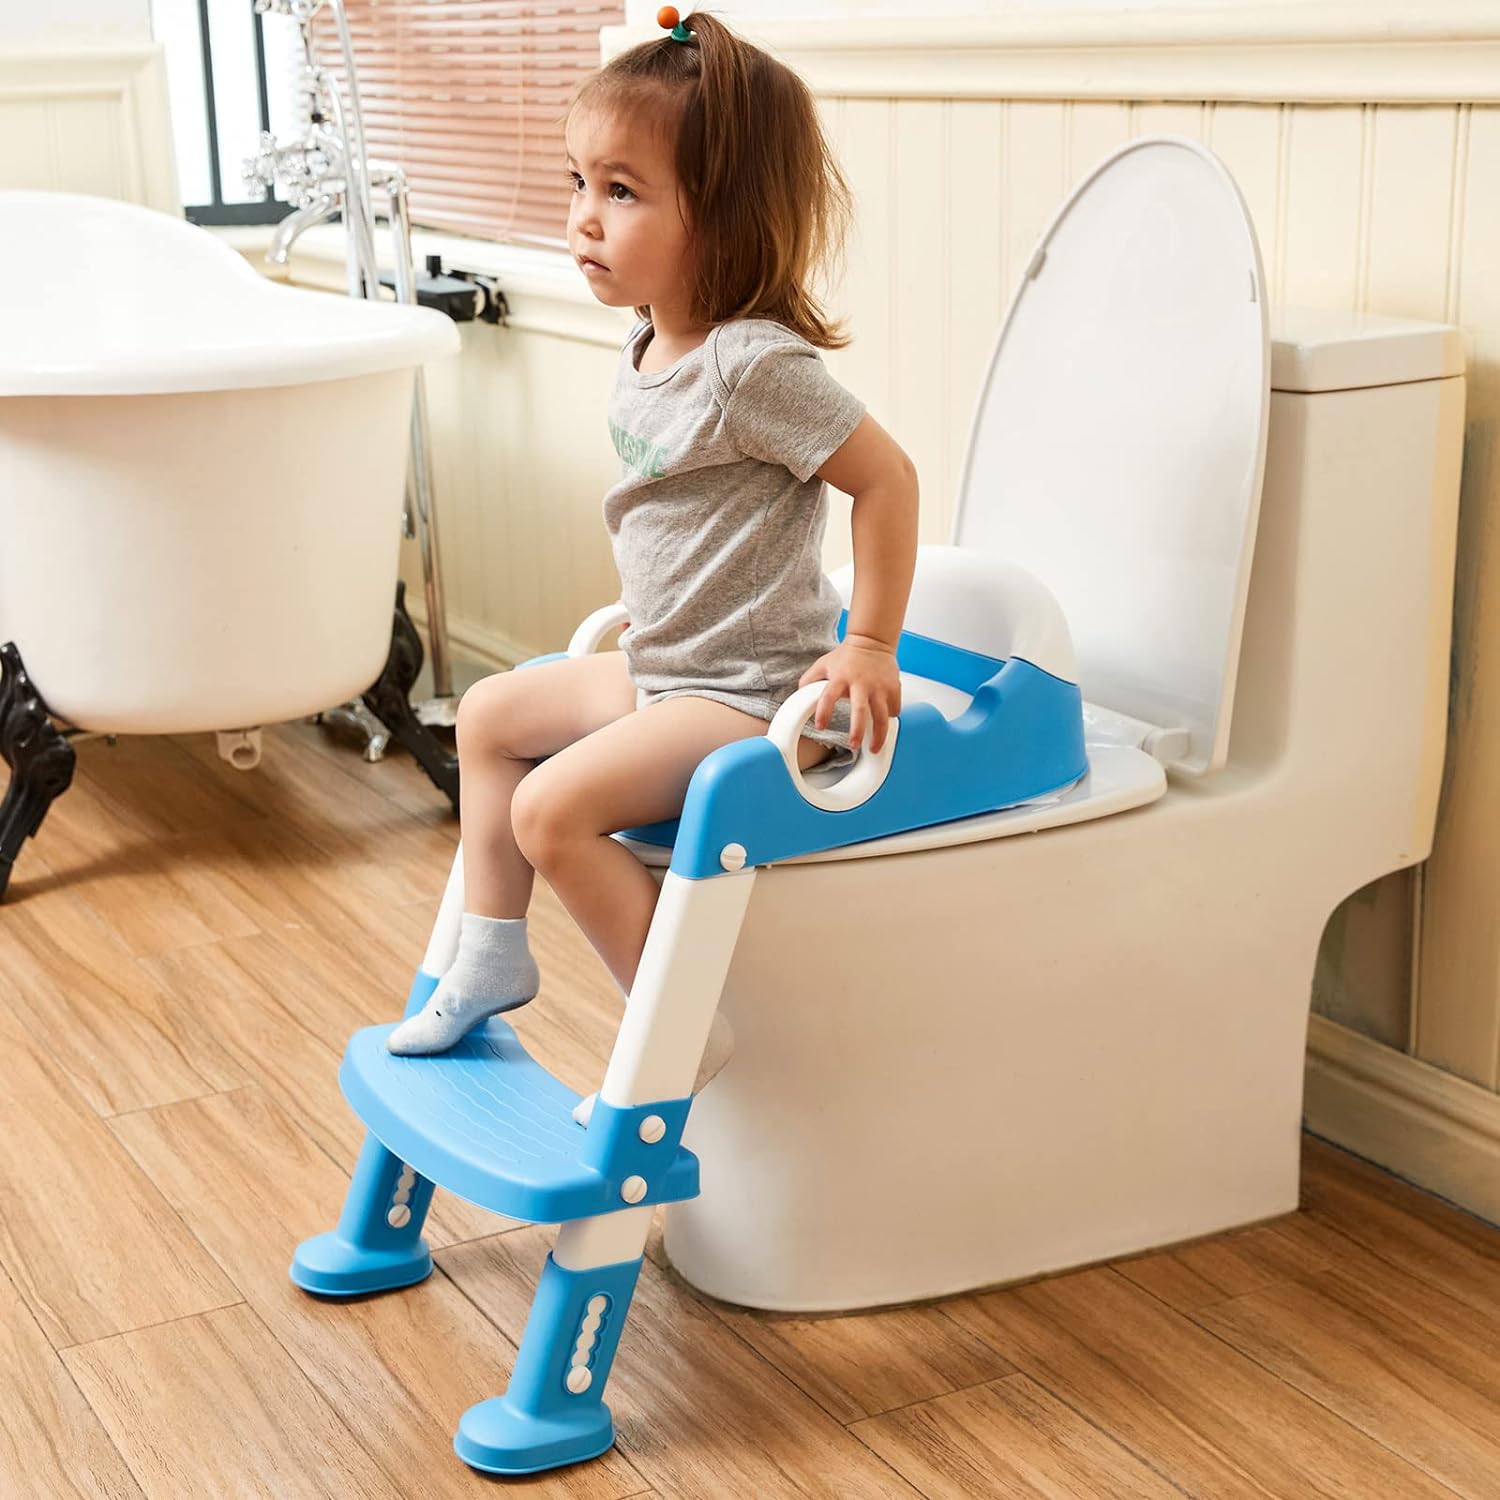 potty training seat for baby boy Potty training toilet seat with step stool ladder for boys and girls